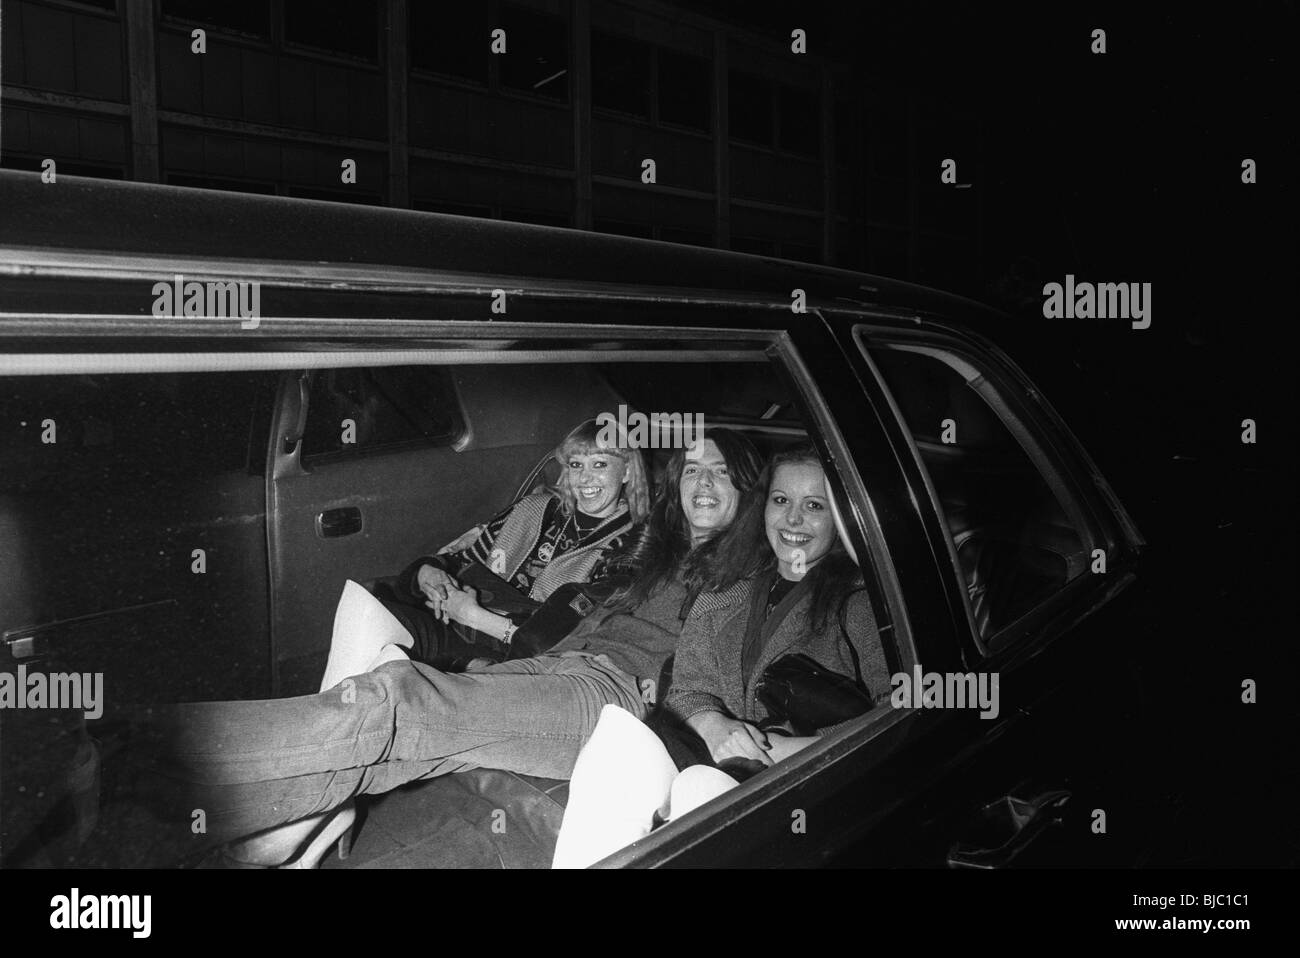 Thin Lizzy on tour in Scandinavia in 1979. Scott Gorham leaves the Copenhagen venue in a limo with some female fans Stock Photo